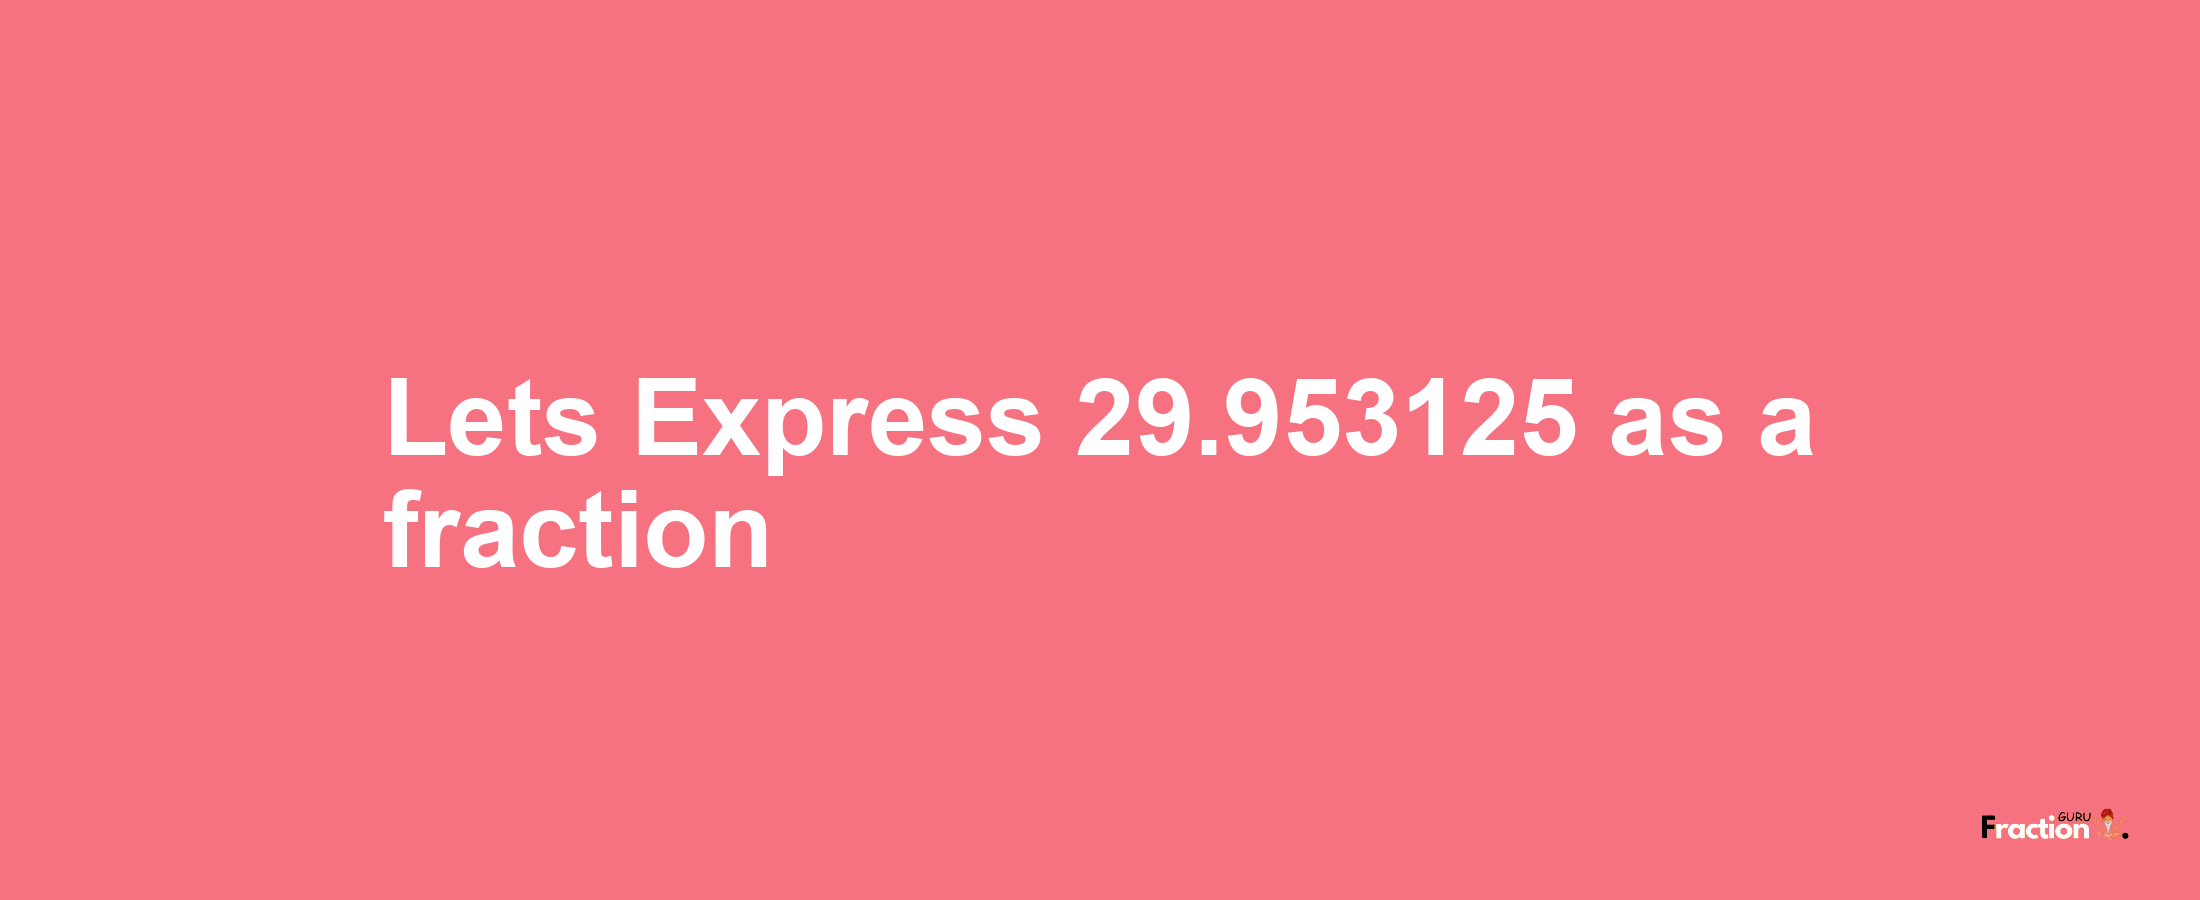 Lets Express 29.953125 as afraction